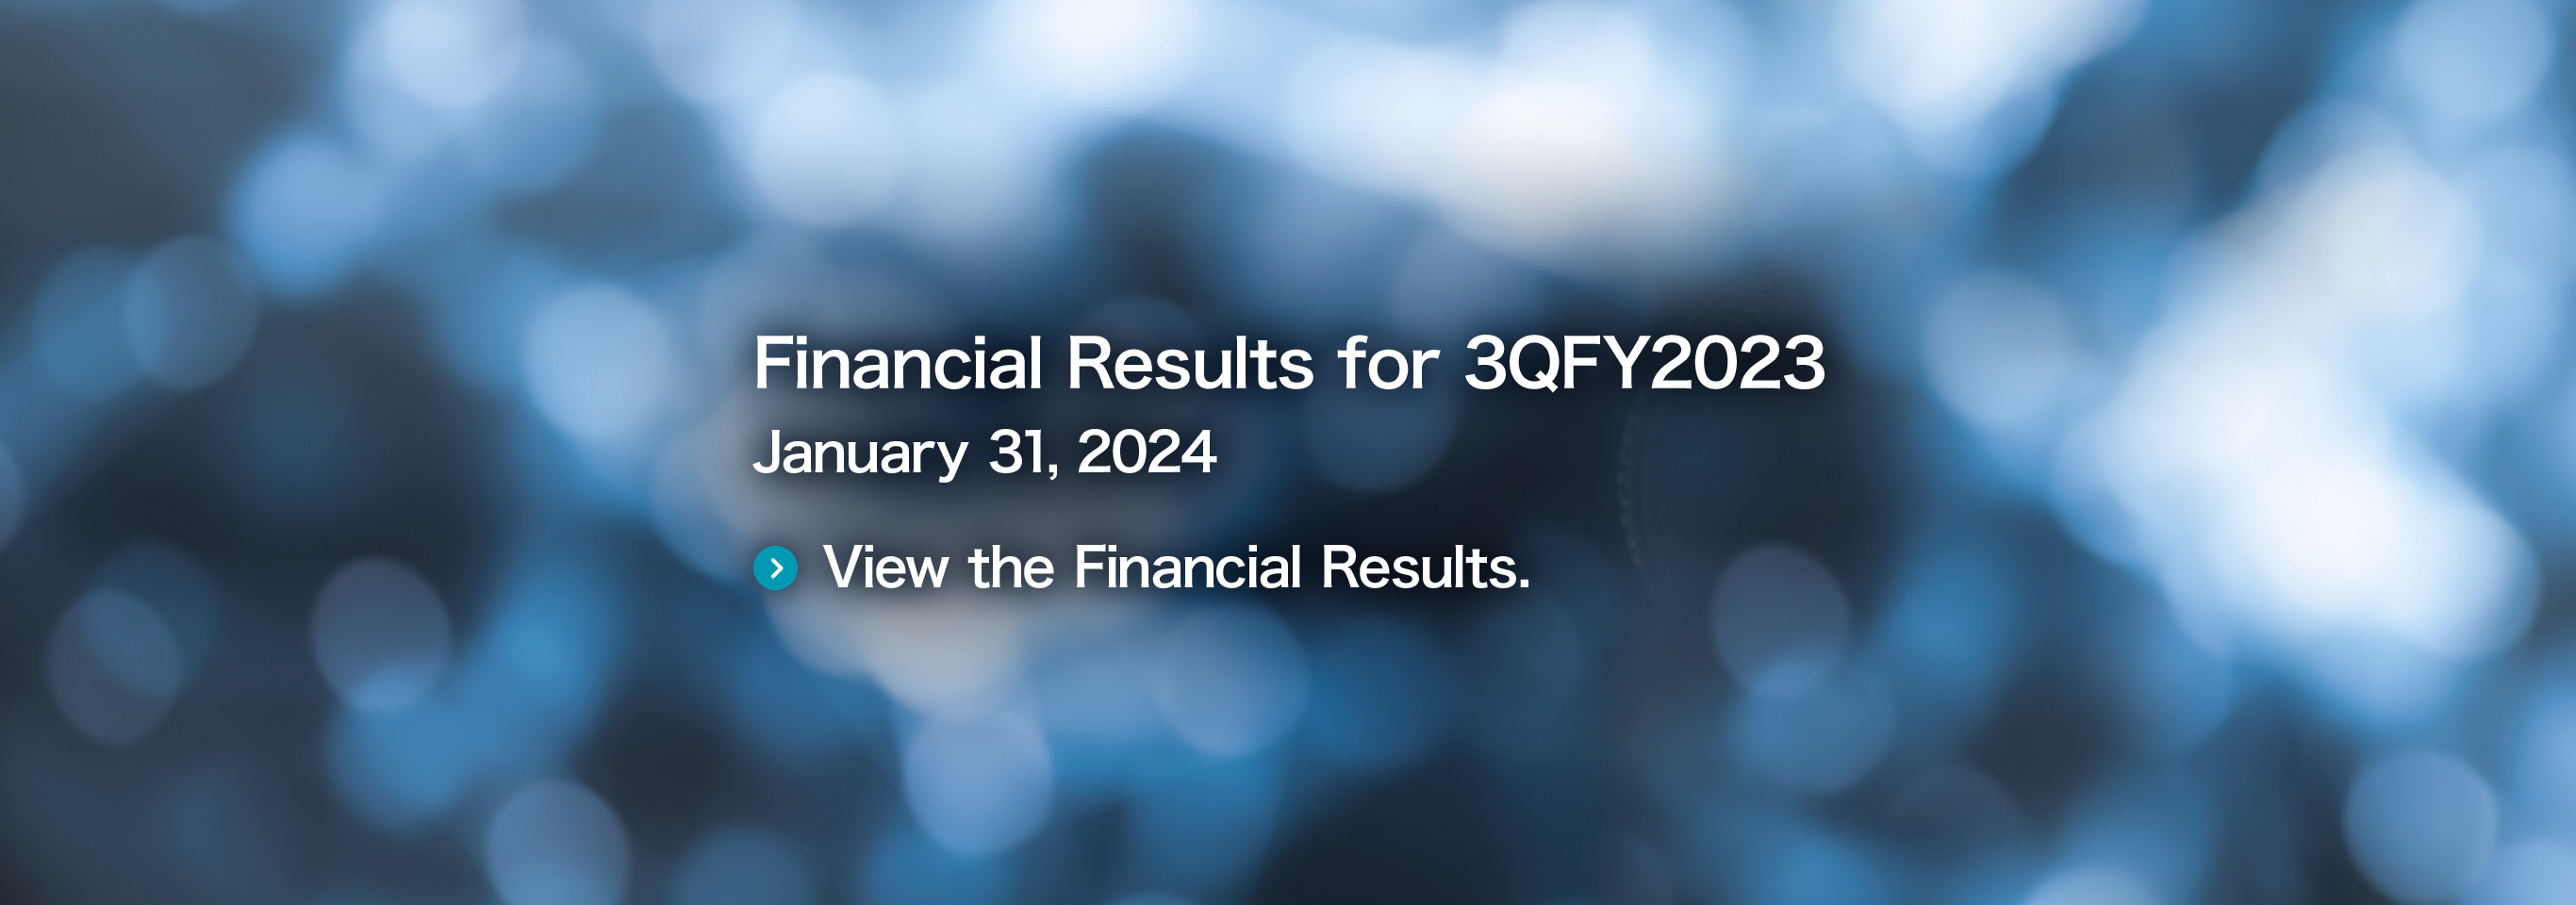 Financial Results for 3QFY2022 January 31, 2023 View the Financial Results.